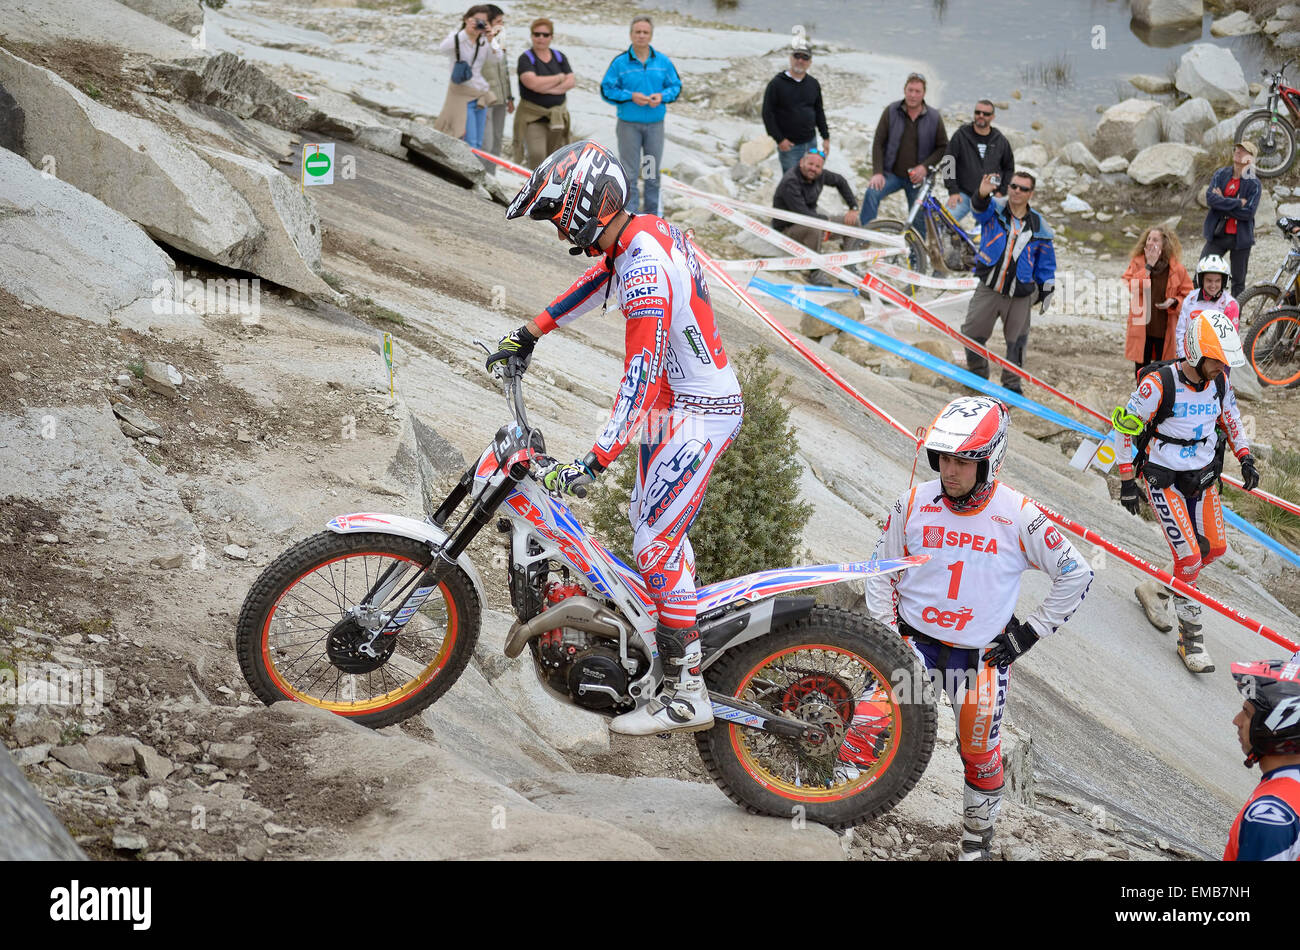 Spain trial championship. Unknown people are looking at Jeroni Fajardo when he drives a Beta motorcycle over granite rocks. Stock Photo